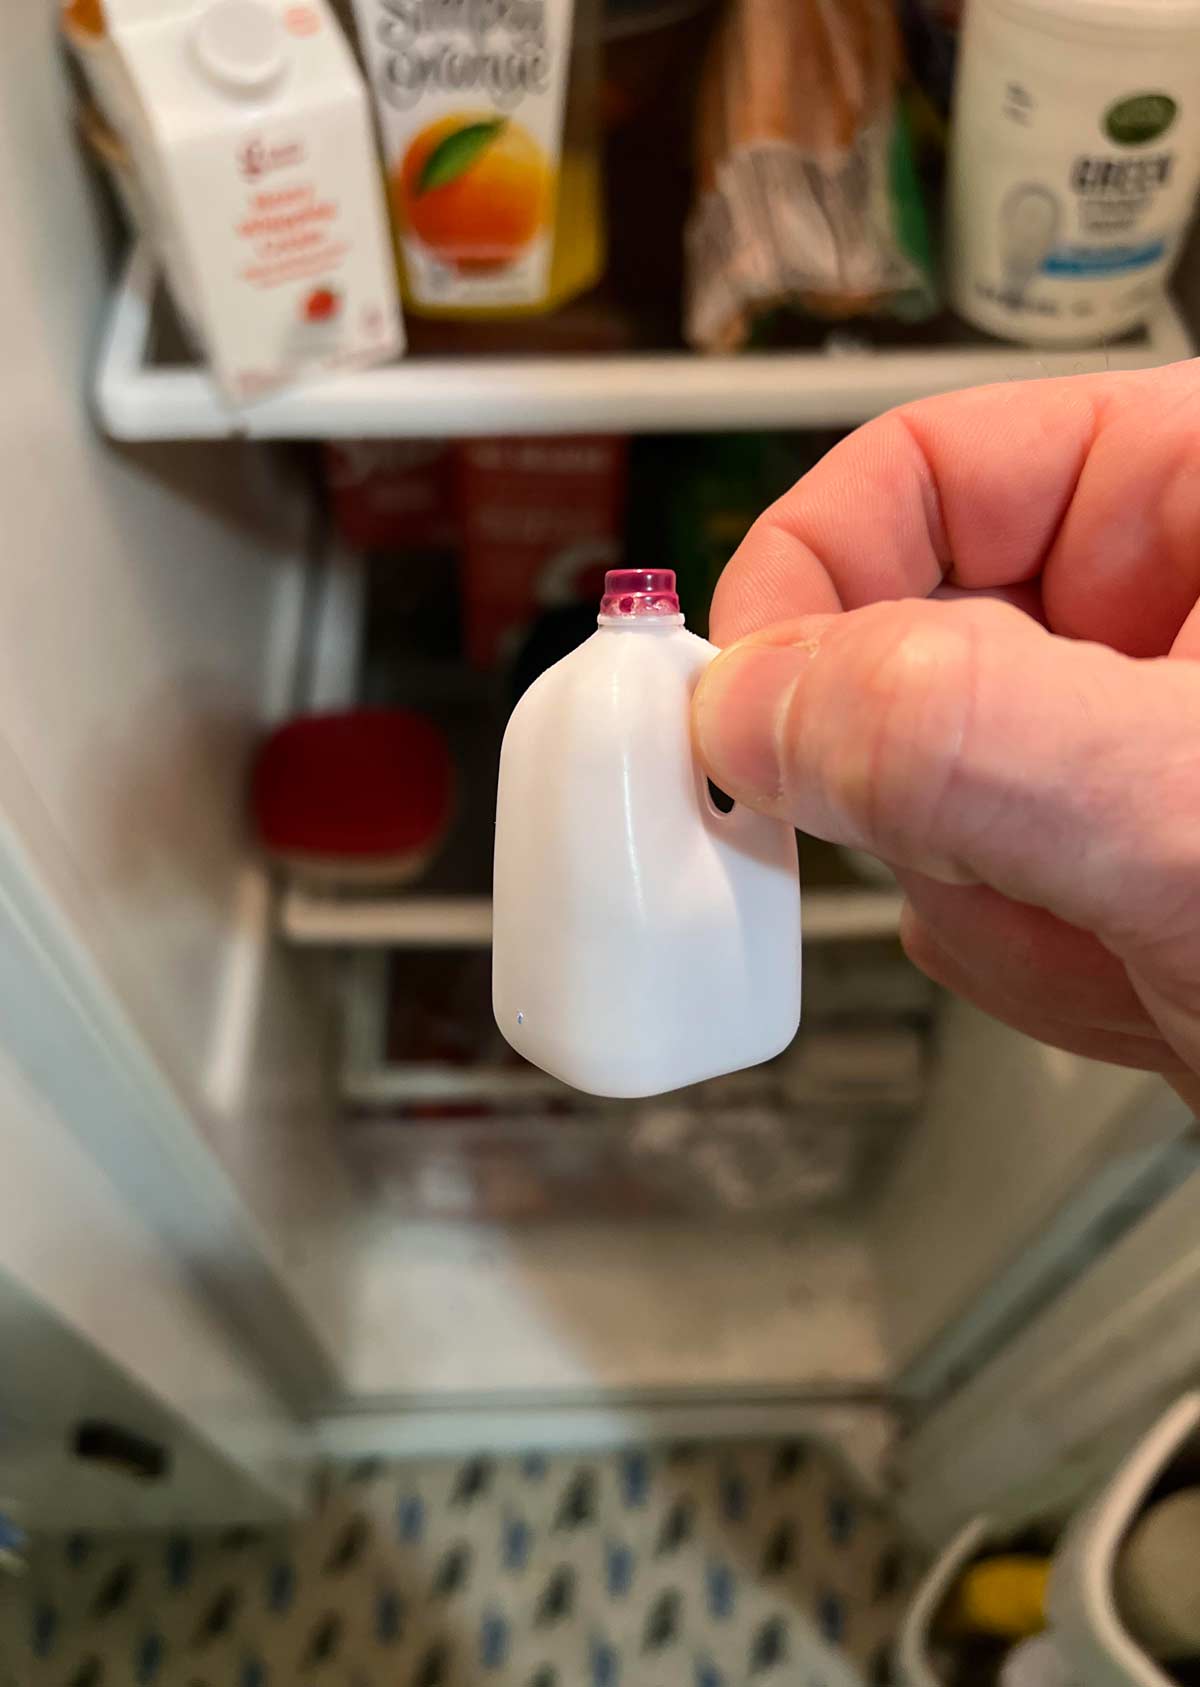 Cool Stuff My daughter told me we only had a little milk left in the fridge